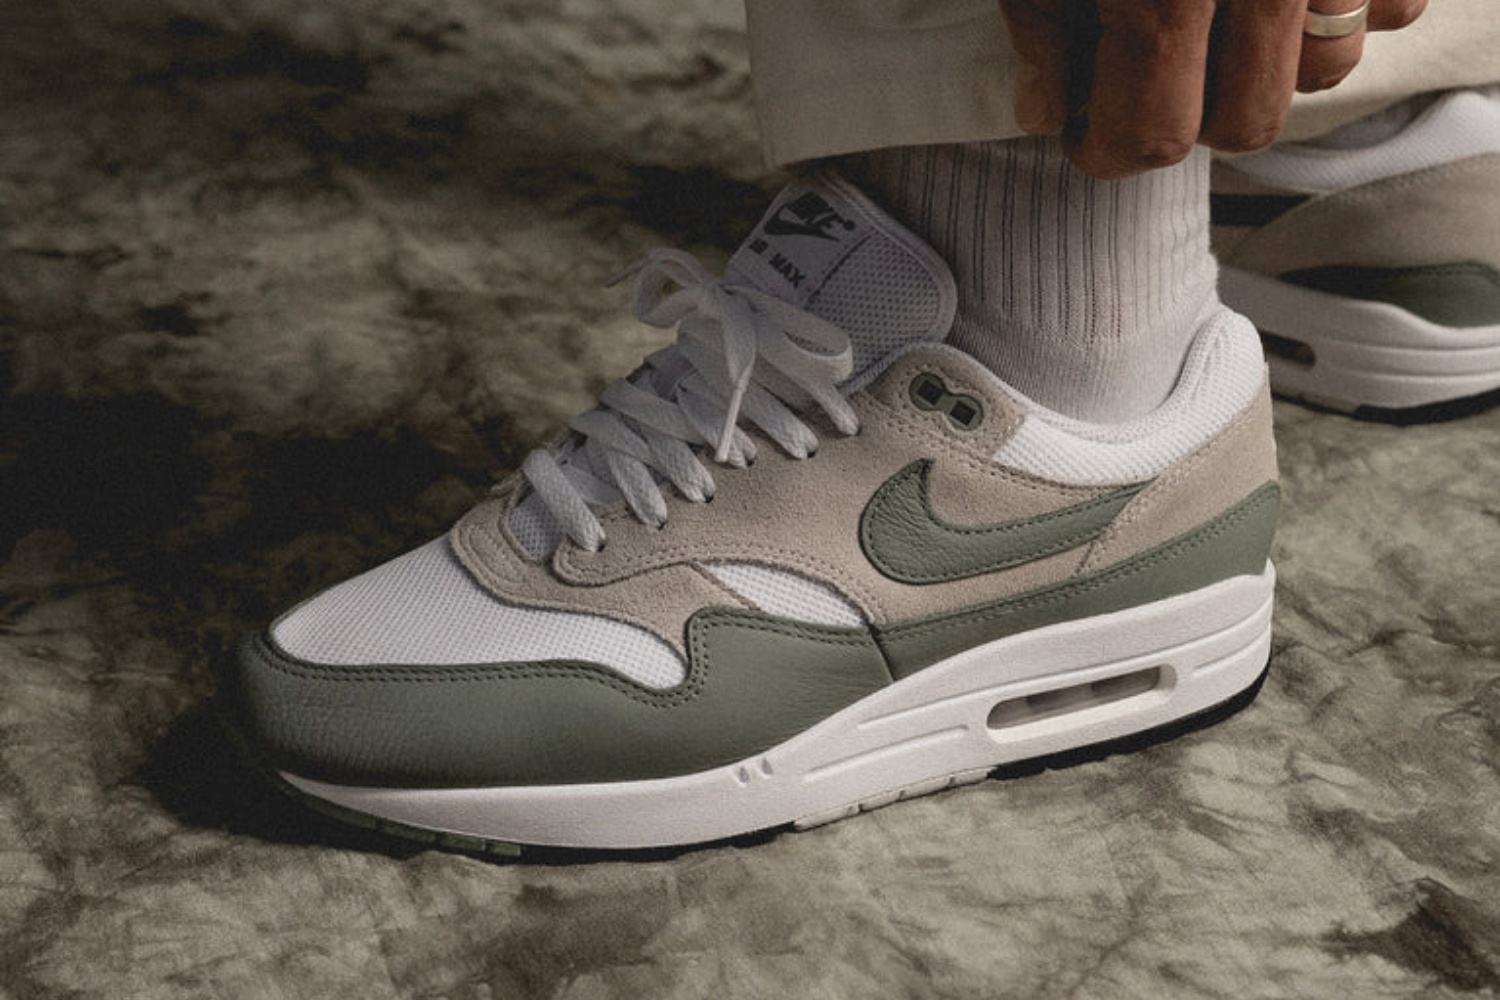 Some of the best Nike Air Max 1 colorways of 2023